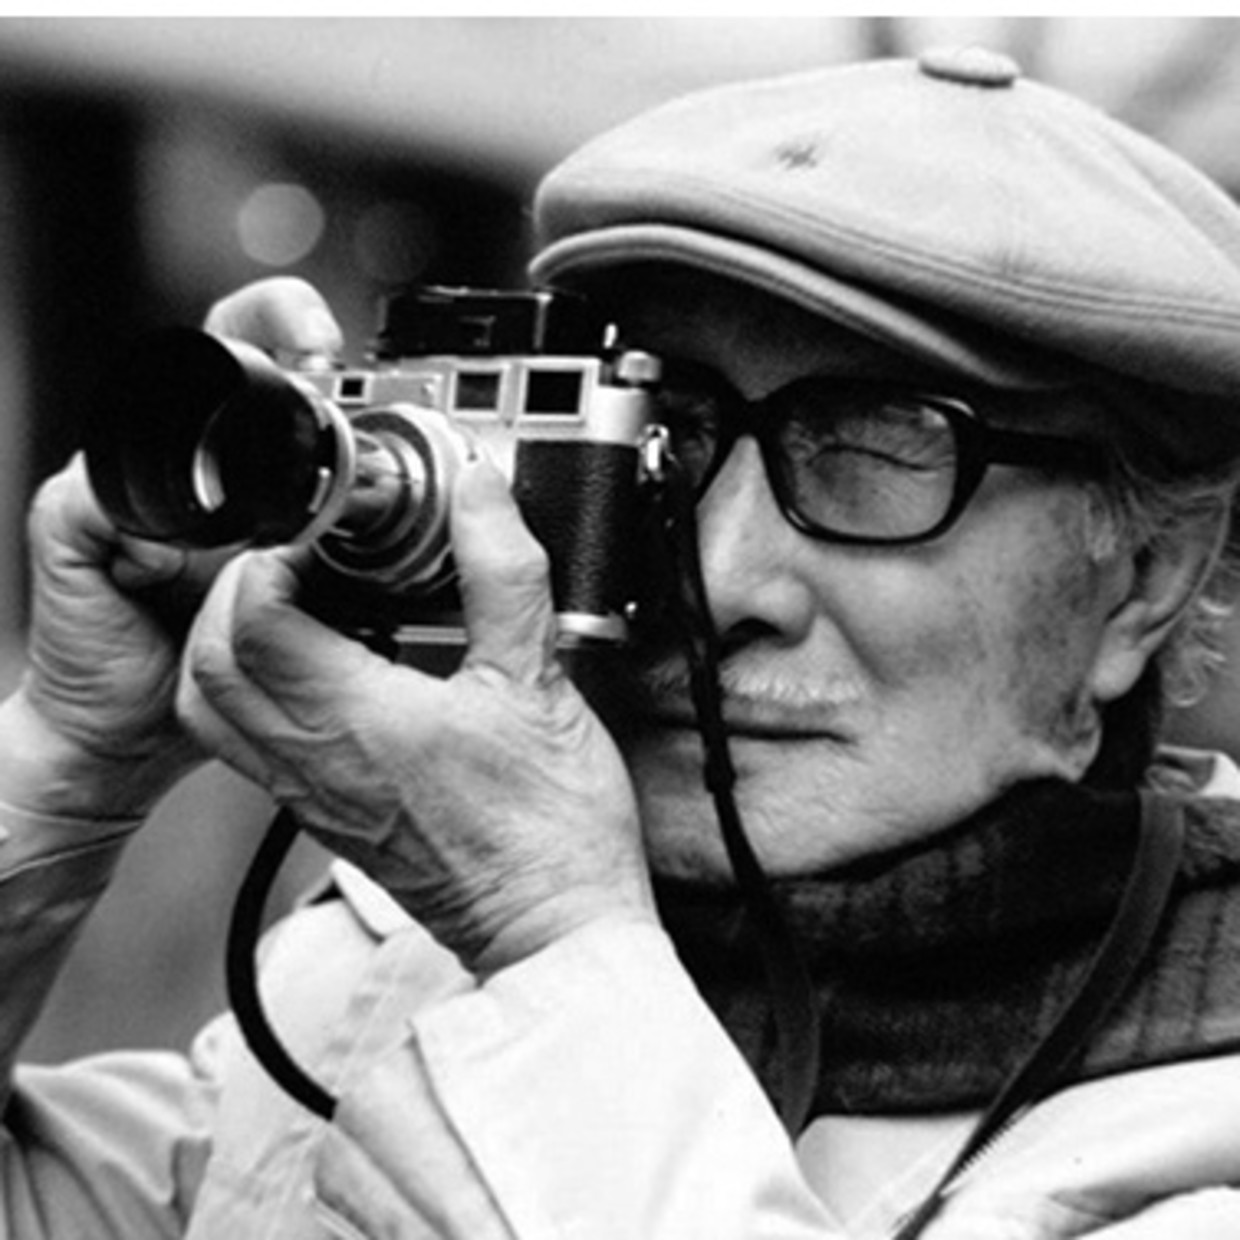 photographer LIMB EUNG-SIK Born 1912, Japan. Died 2001, South Korea. Limb Eung-sik is now regarded as one of the most...